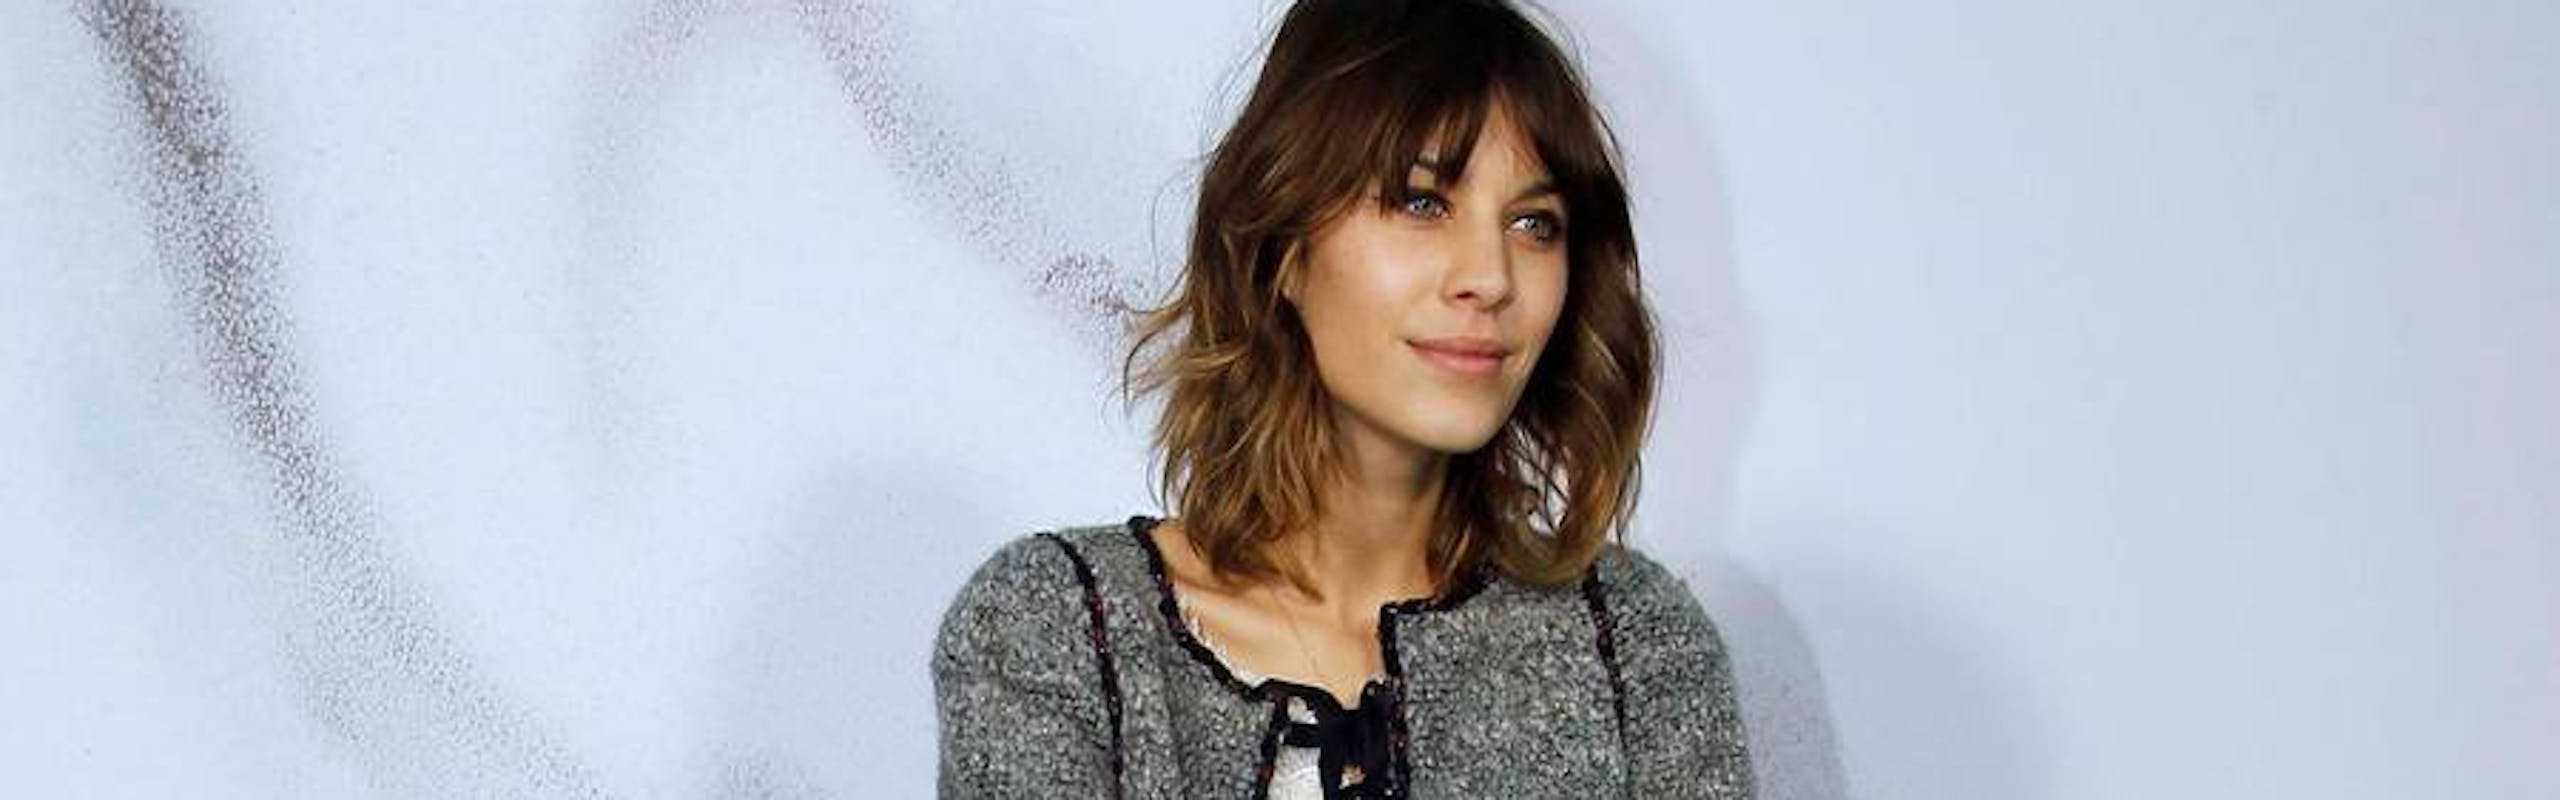 Alexa Chung wearing a tweed jacket, flowy white top, sheer black tights and black leather ankle boots and carrying a straw bag.